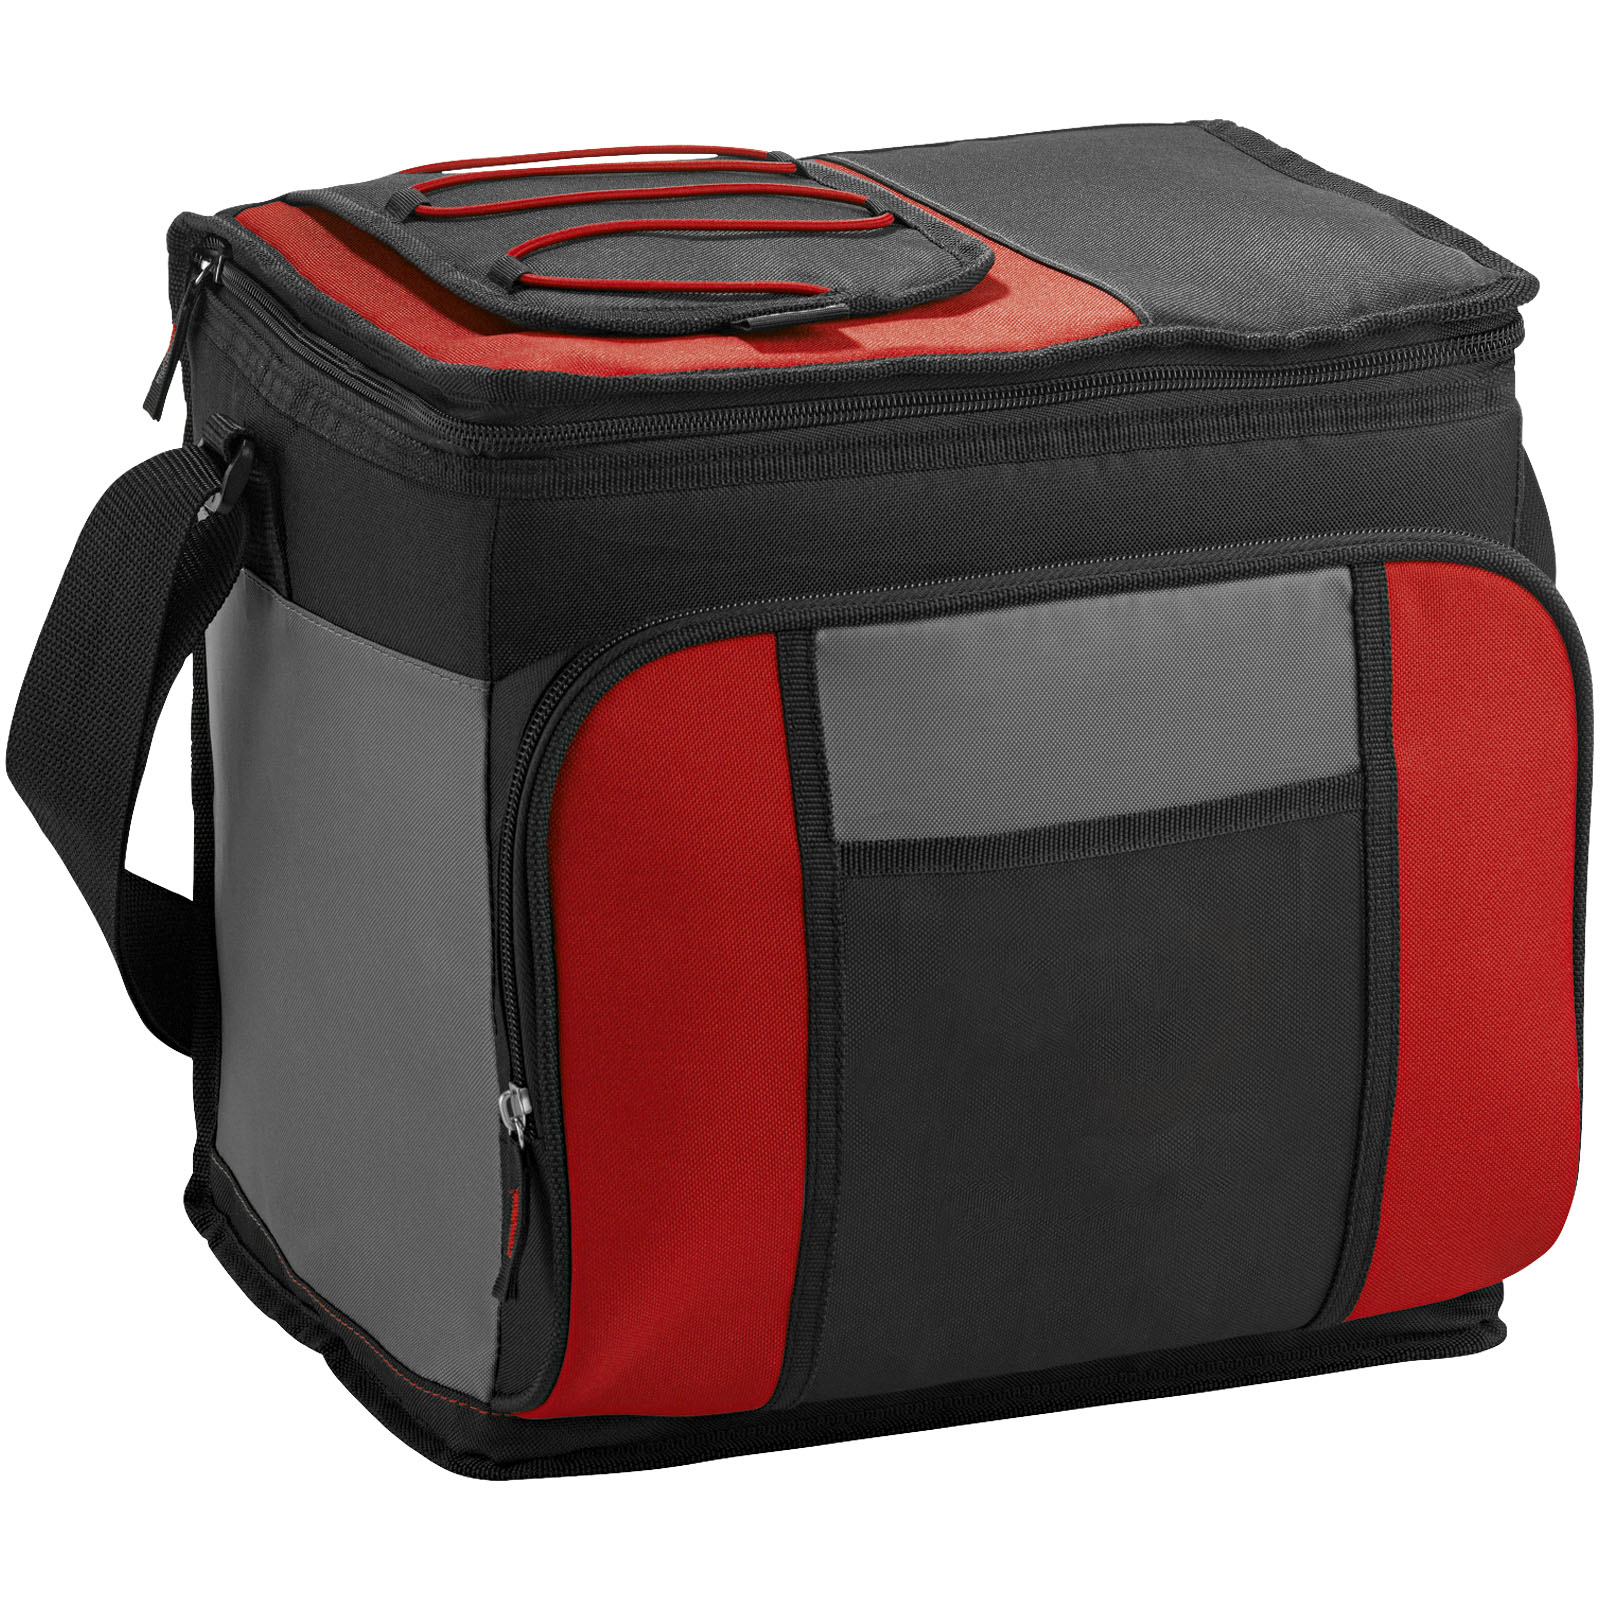 Charlton ChillMaxx Cooler Bag with a capacity of 24 cans - Tynemouth